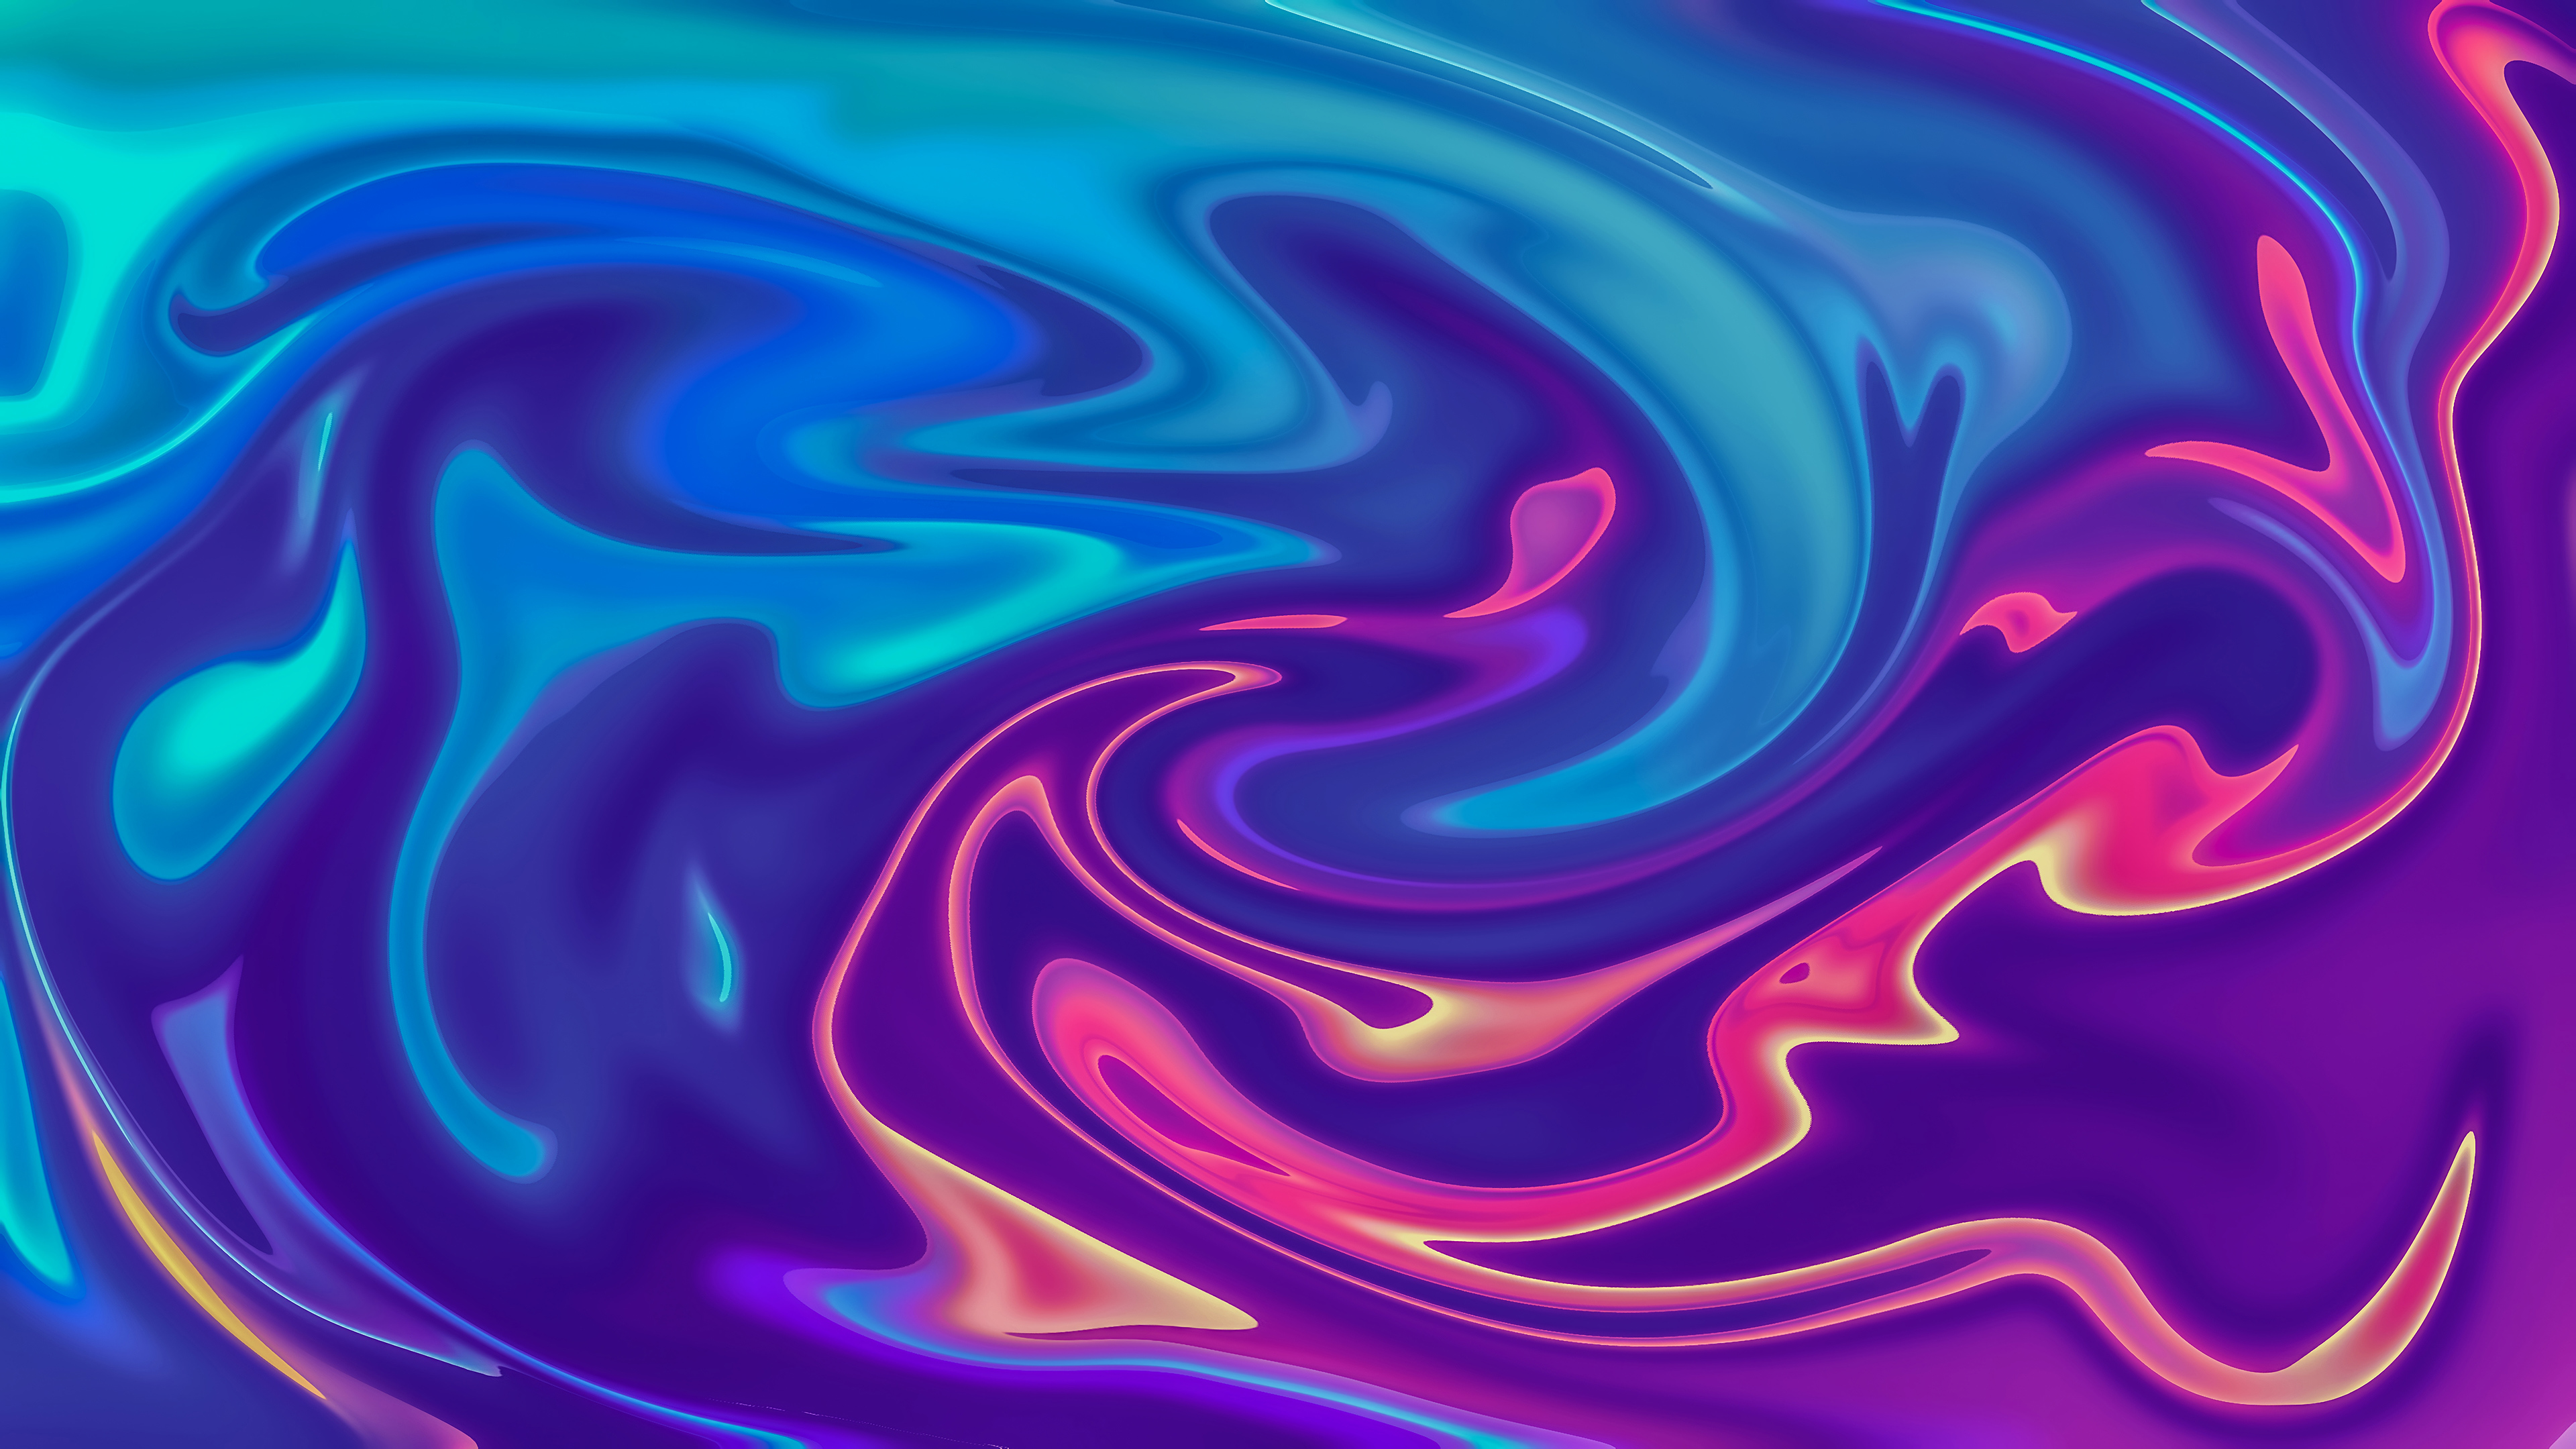 Gradient Purple Abstract Background - 3840x2160 Wallpaper 